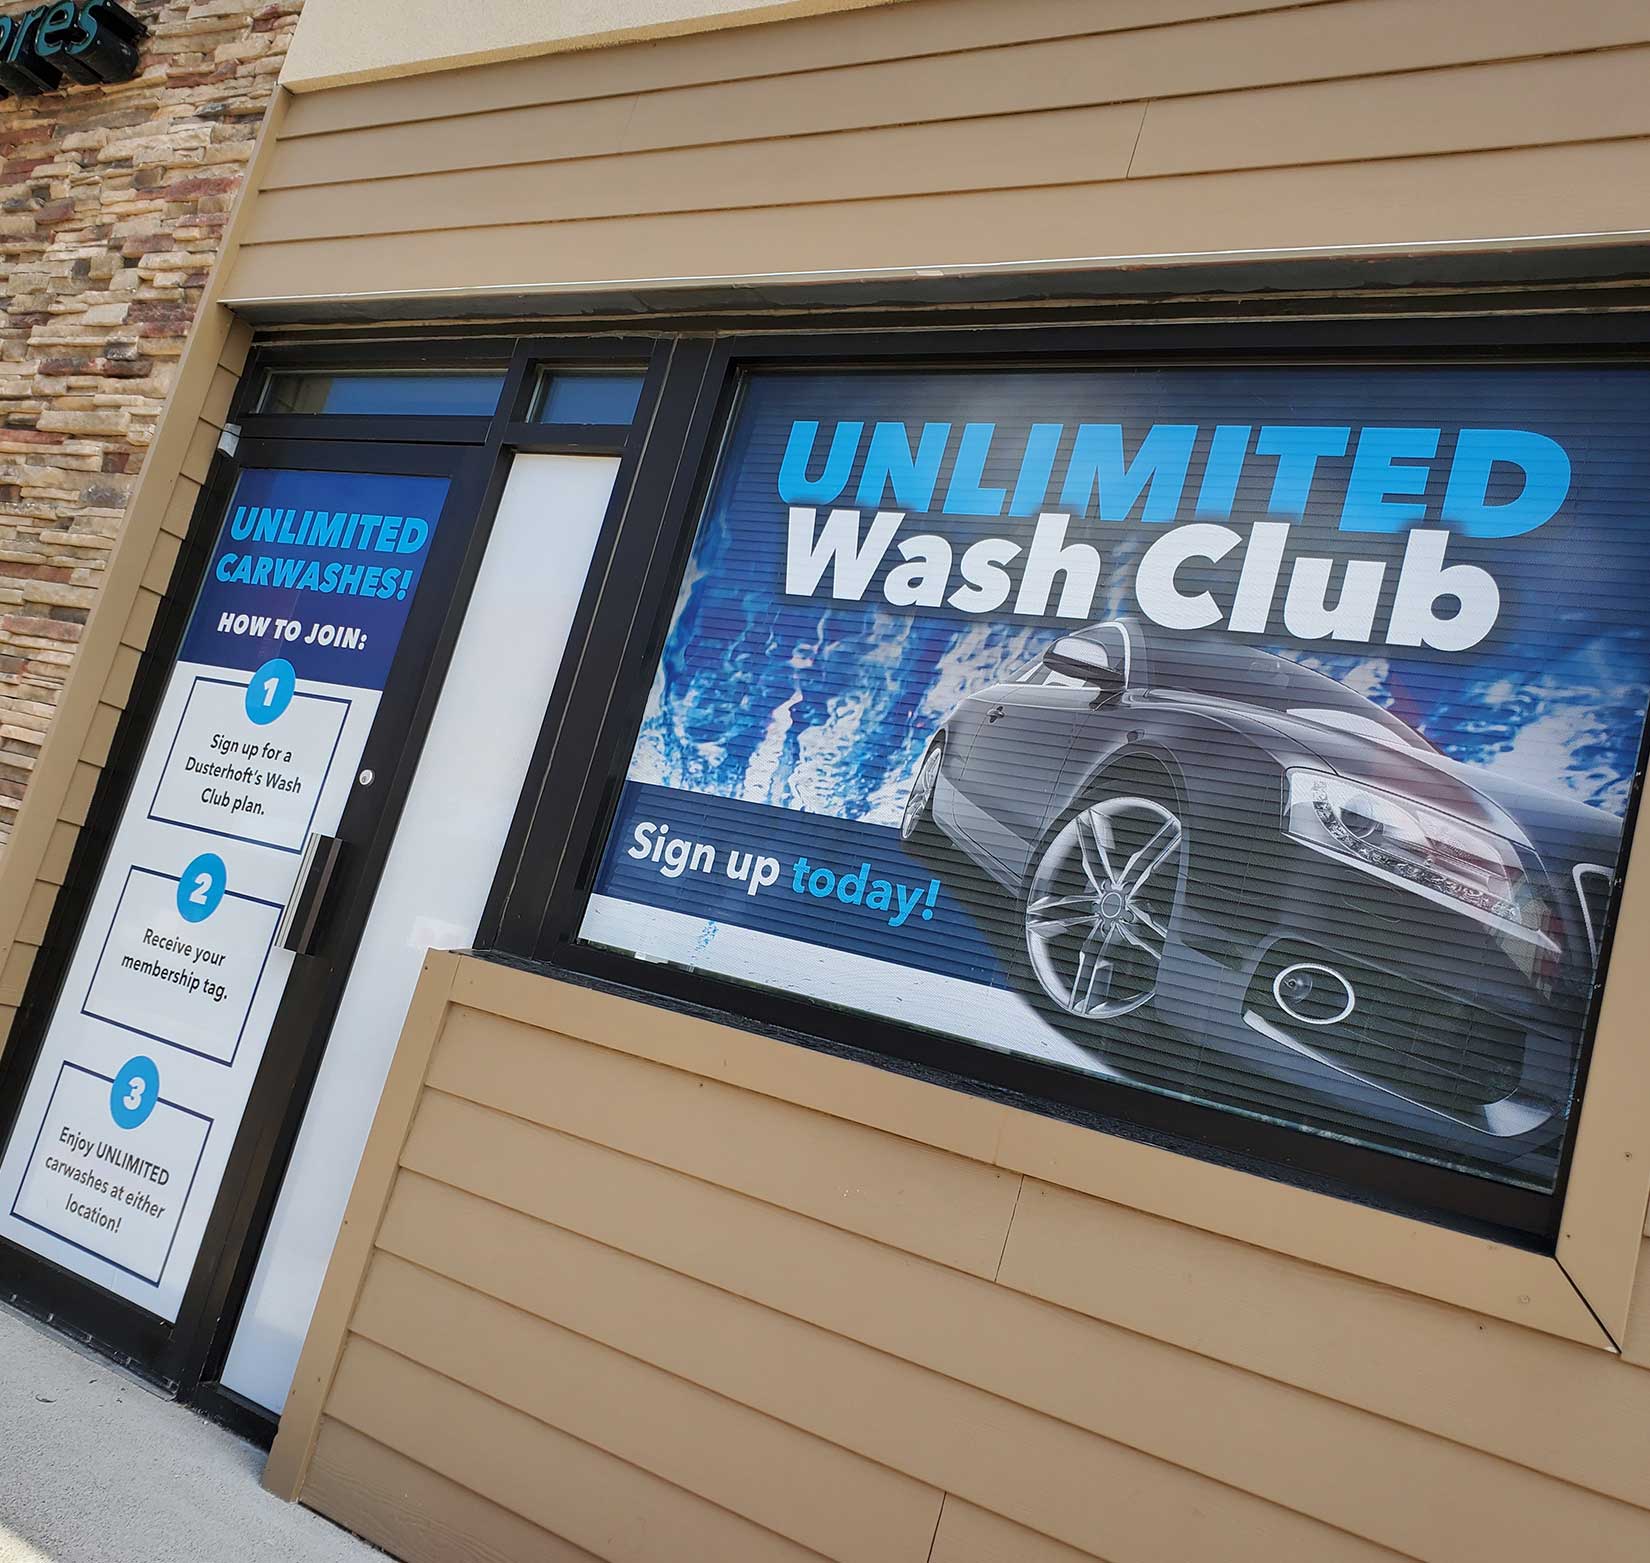 Exterior window signage promoting Dusterhoft Family Stores’ unlimited carwash club